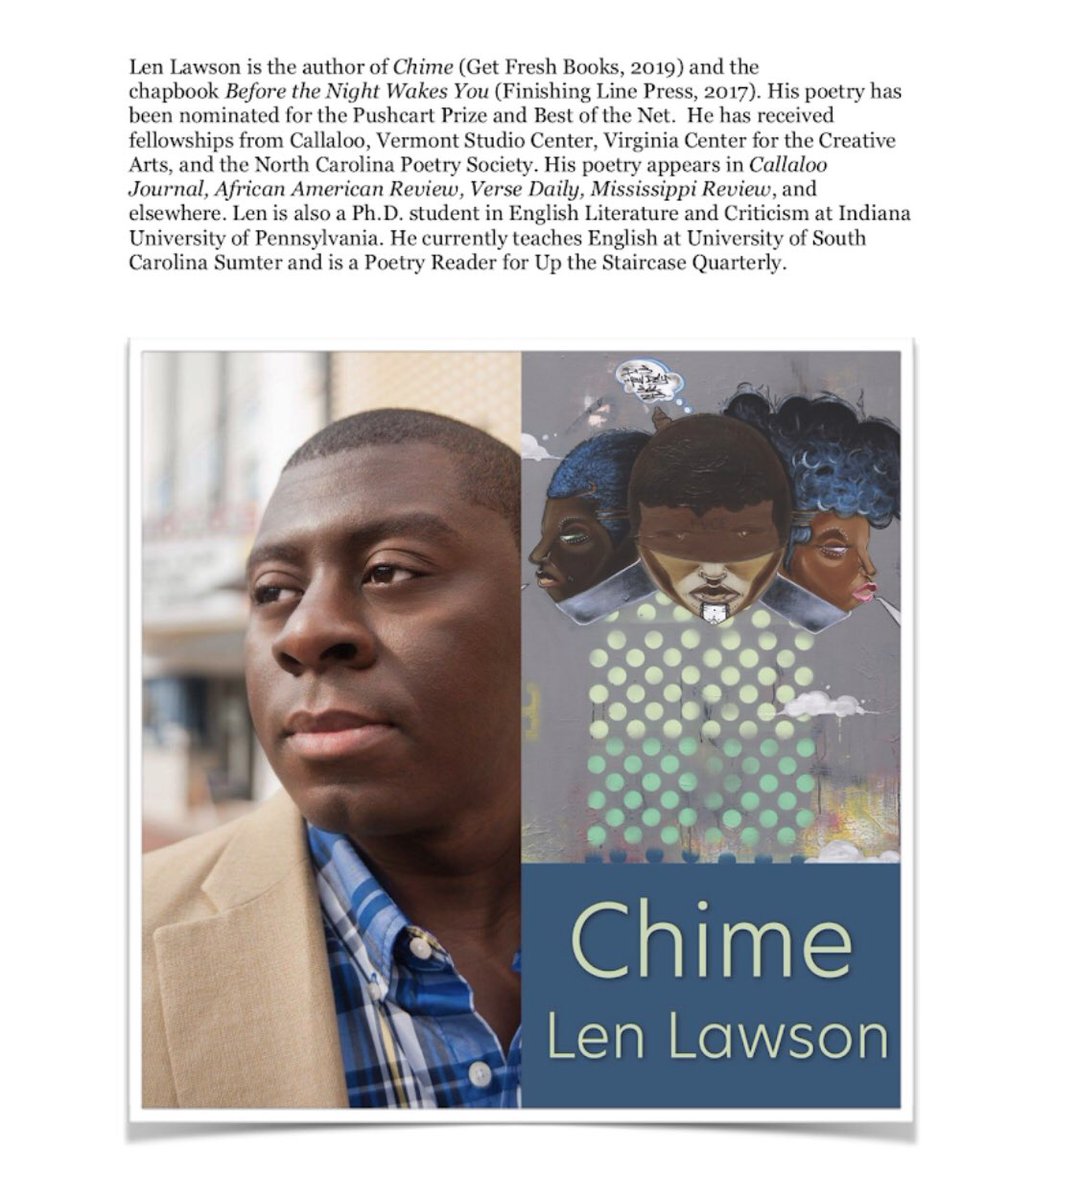 Please join us on Friday, March 29th from 7PM to 9PM at the Langston Hughes House to celebrate Len Lawson's debut collection, Chime. 

#poetryreadings #nycevents #langstonhugheshouse #debutbooks #getfreshbooksllc 
@cmanick @lenvillelaws @SageEkere @ITooArts